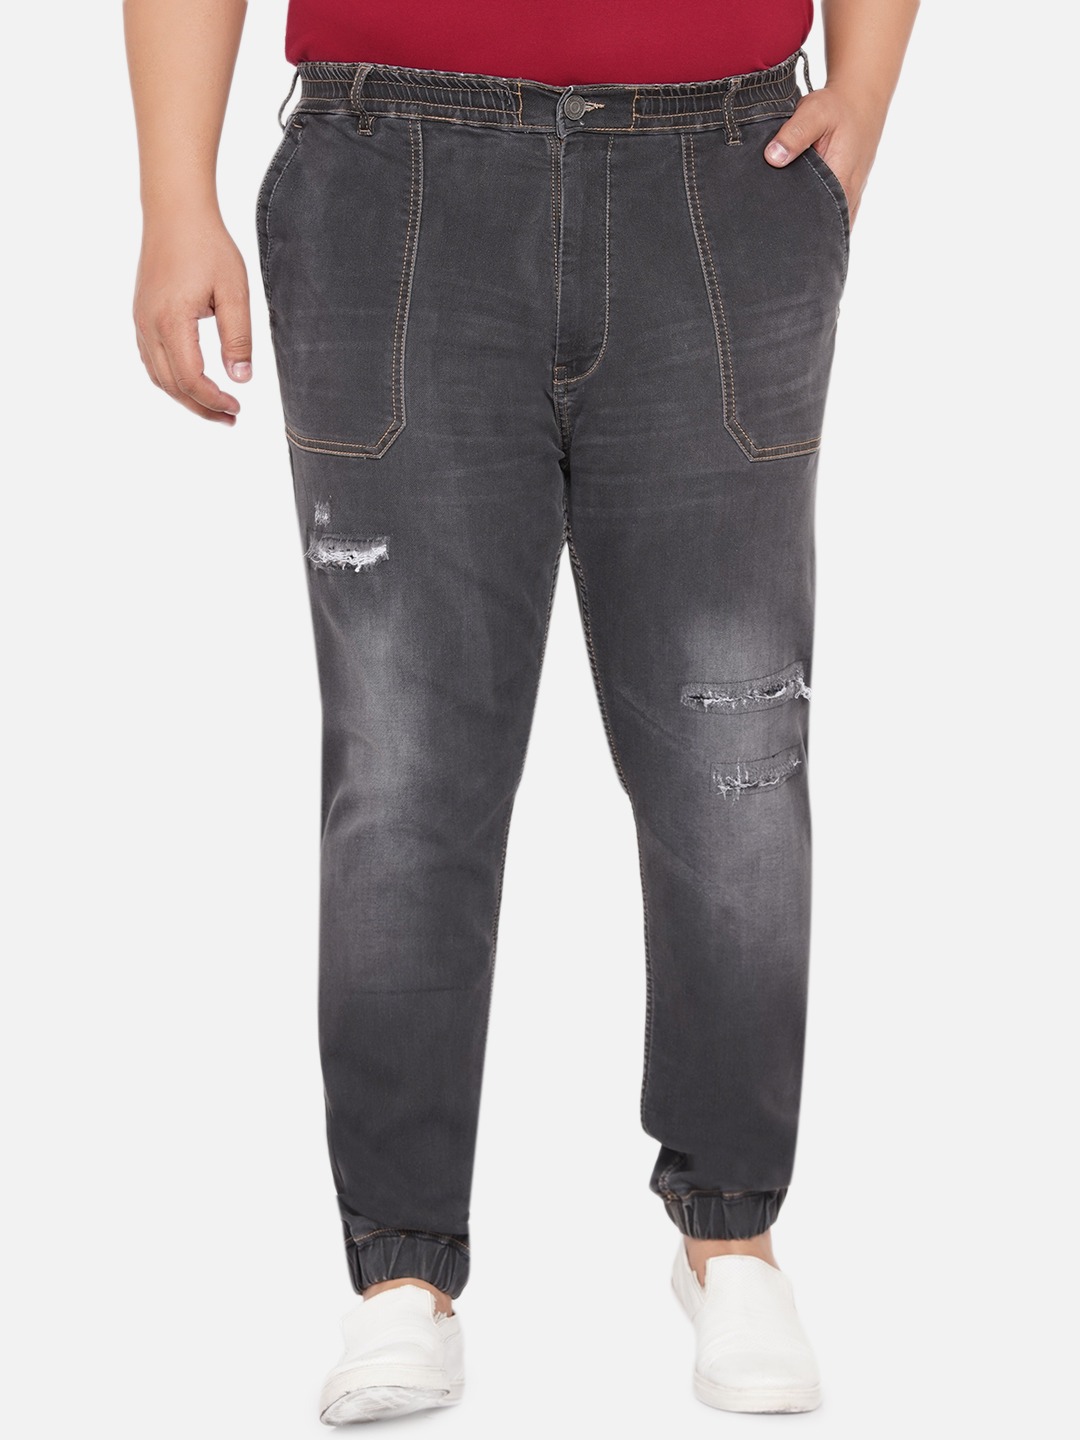 The Distressed Joggers